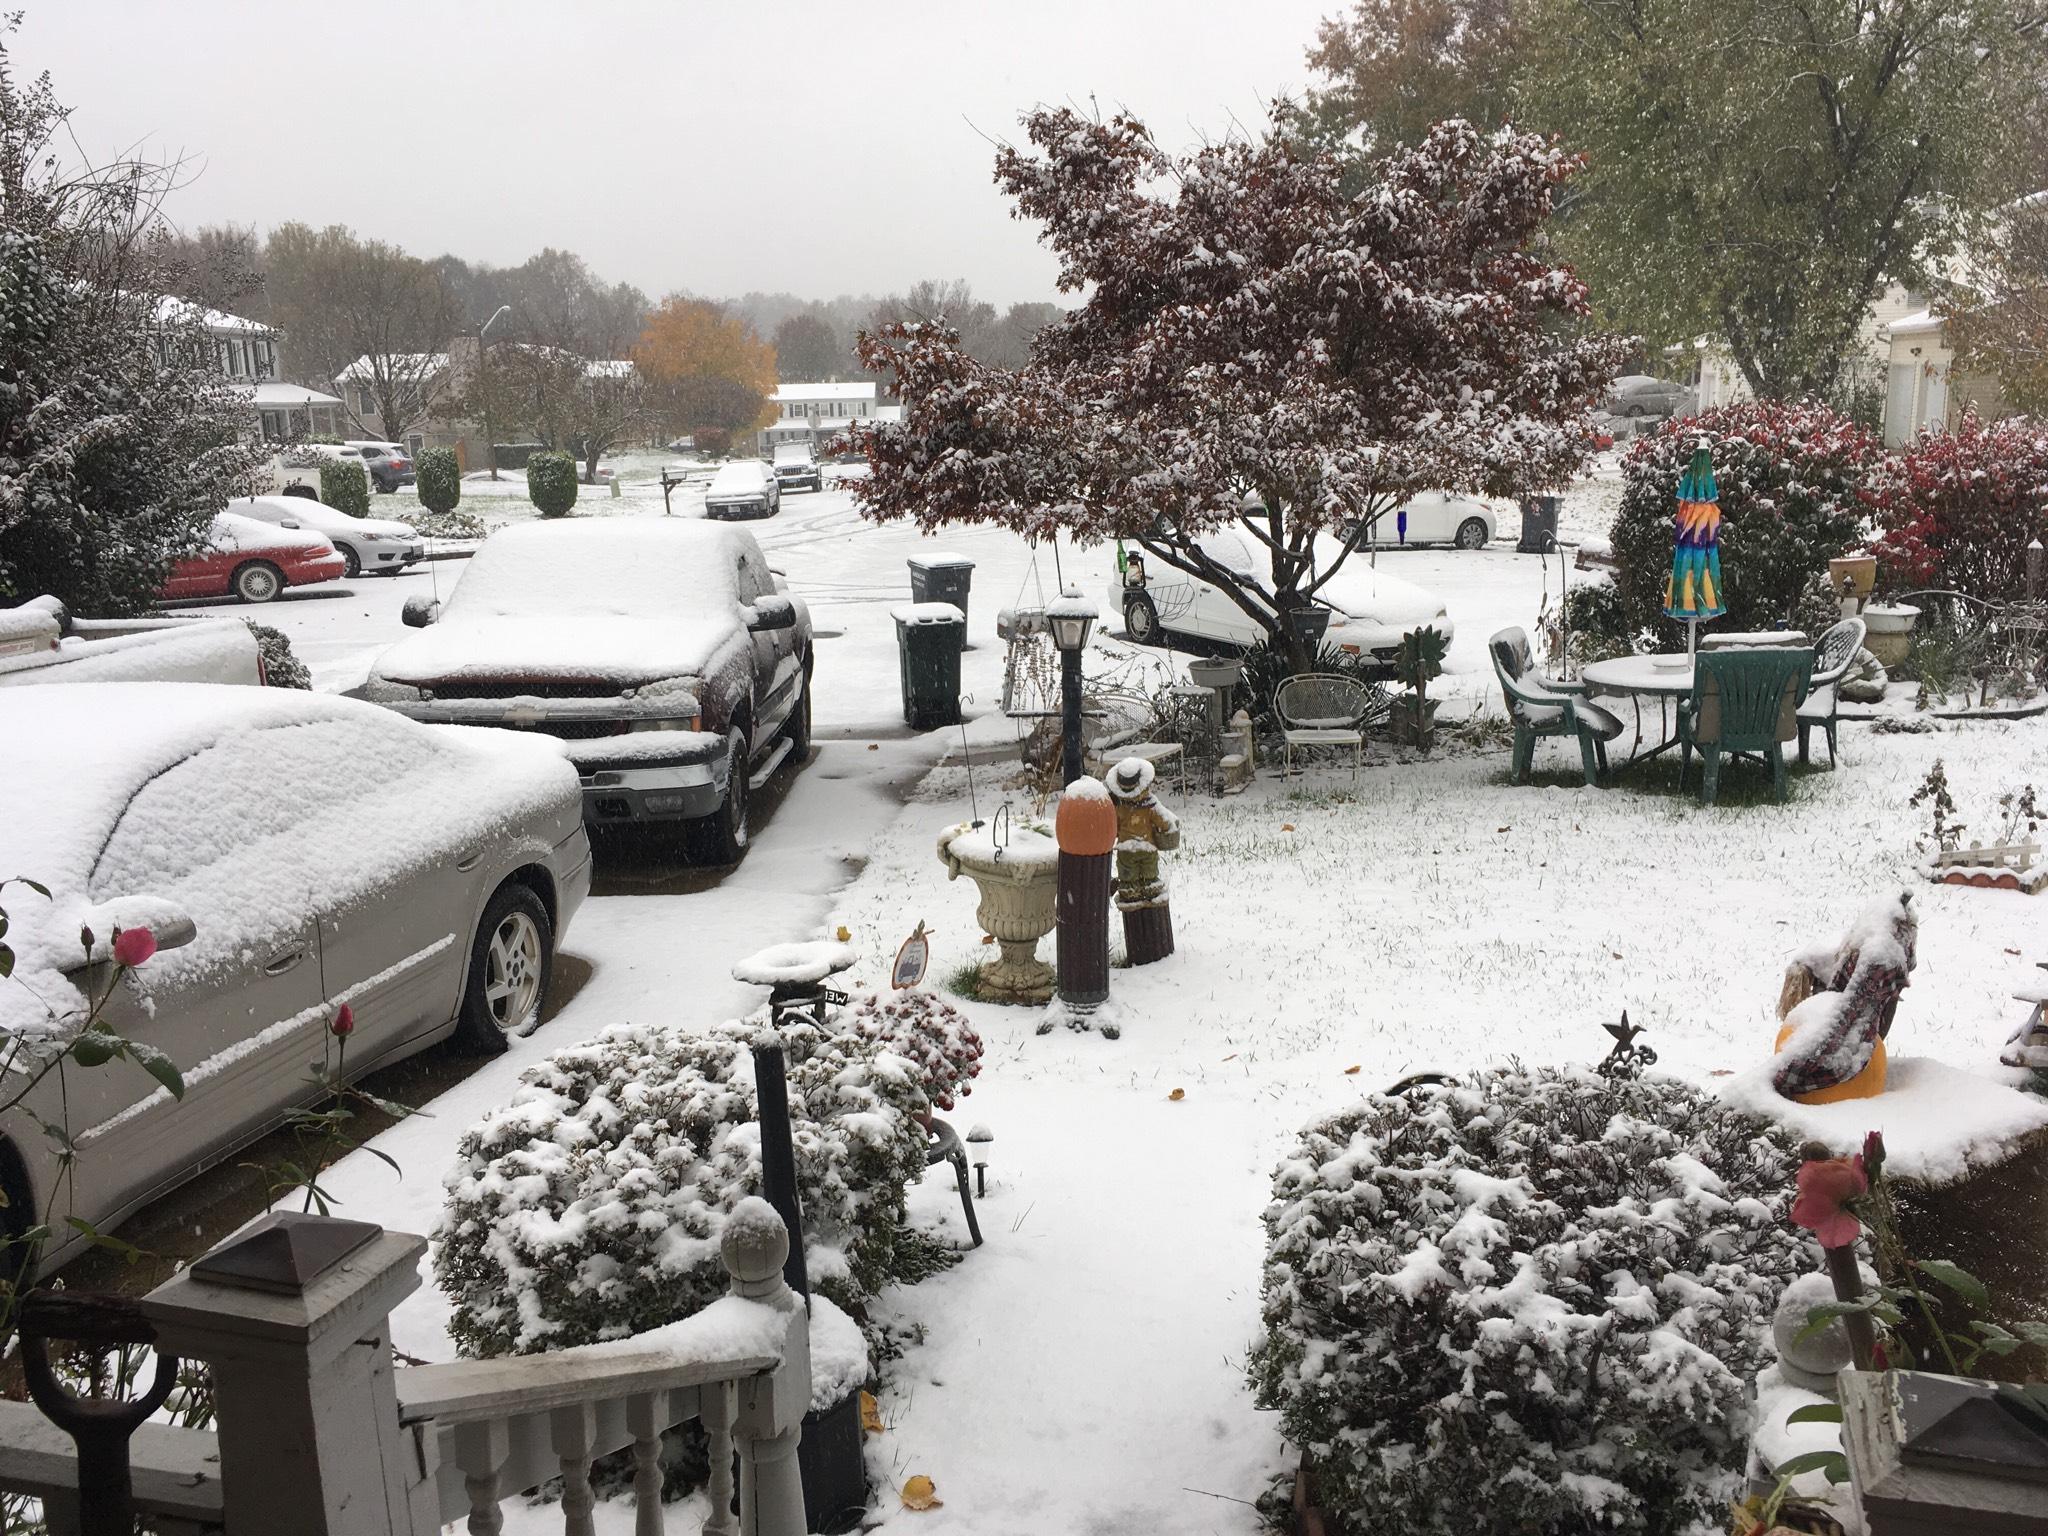 Photos: News4 Viewers Share Their Images of the Early Winter Weather